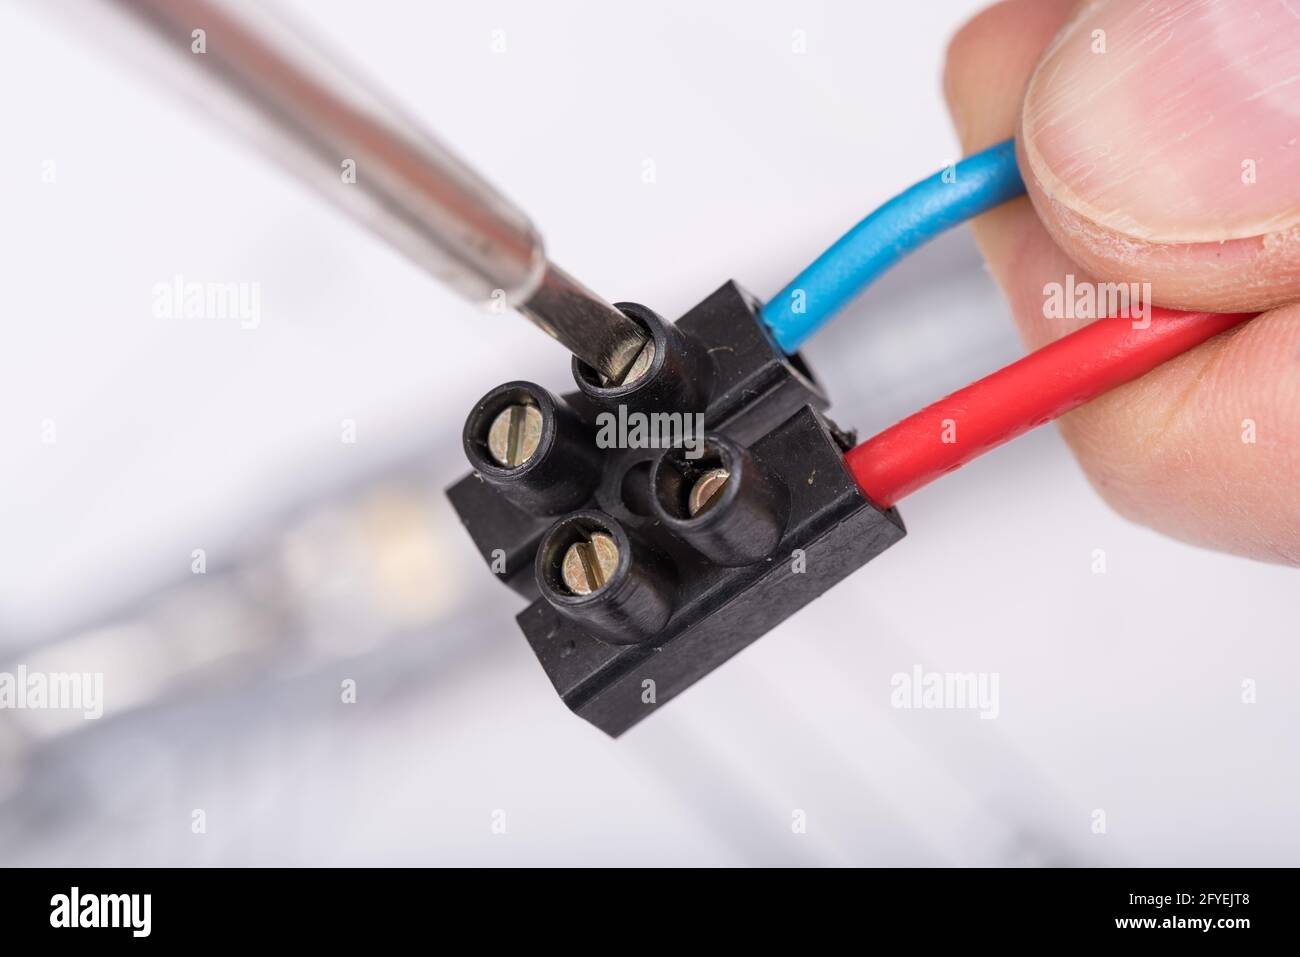 Clamping a wire in a connector, closeup Stock Photo